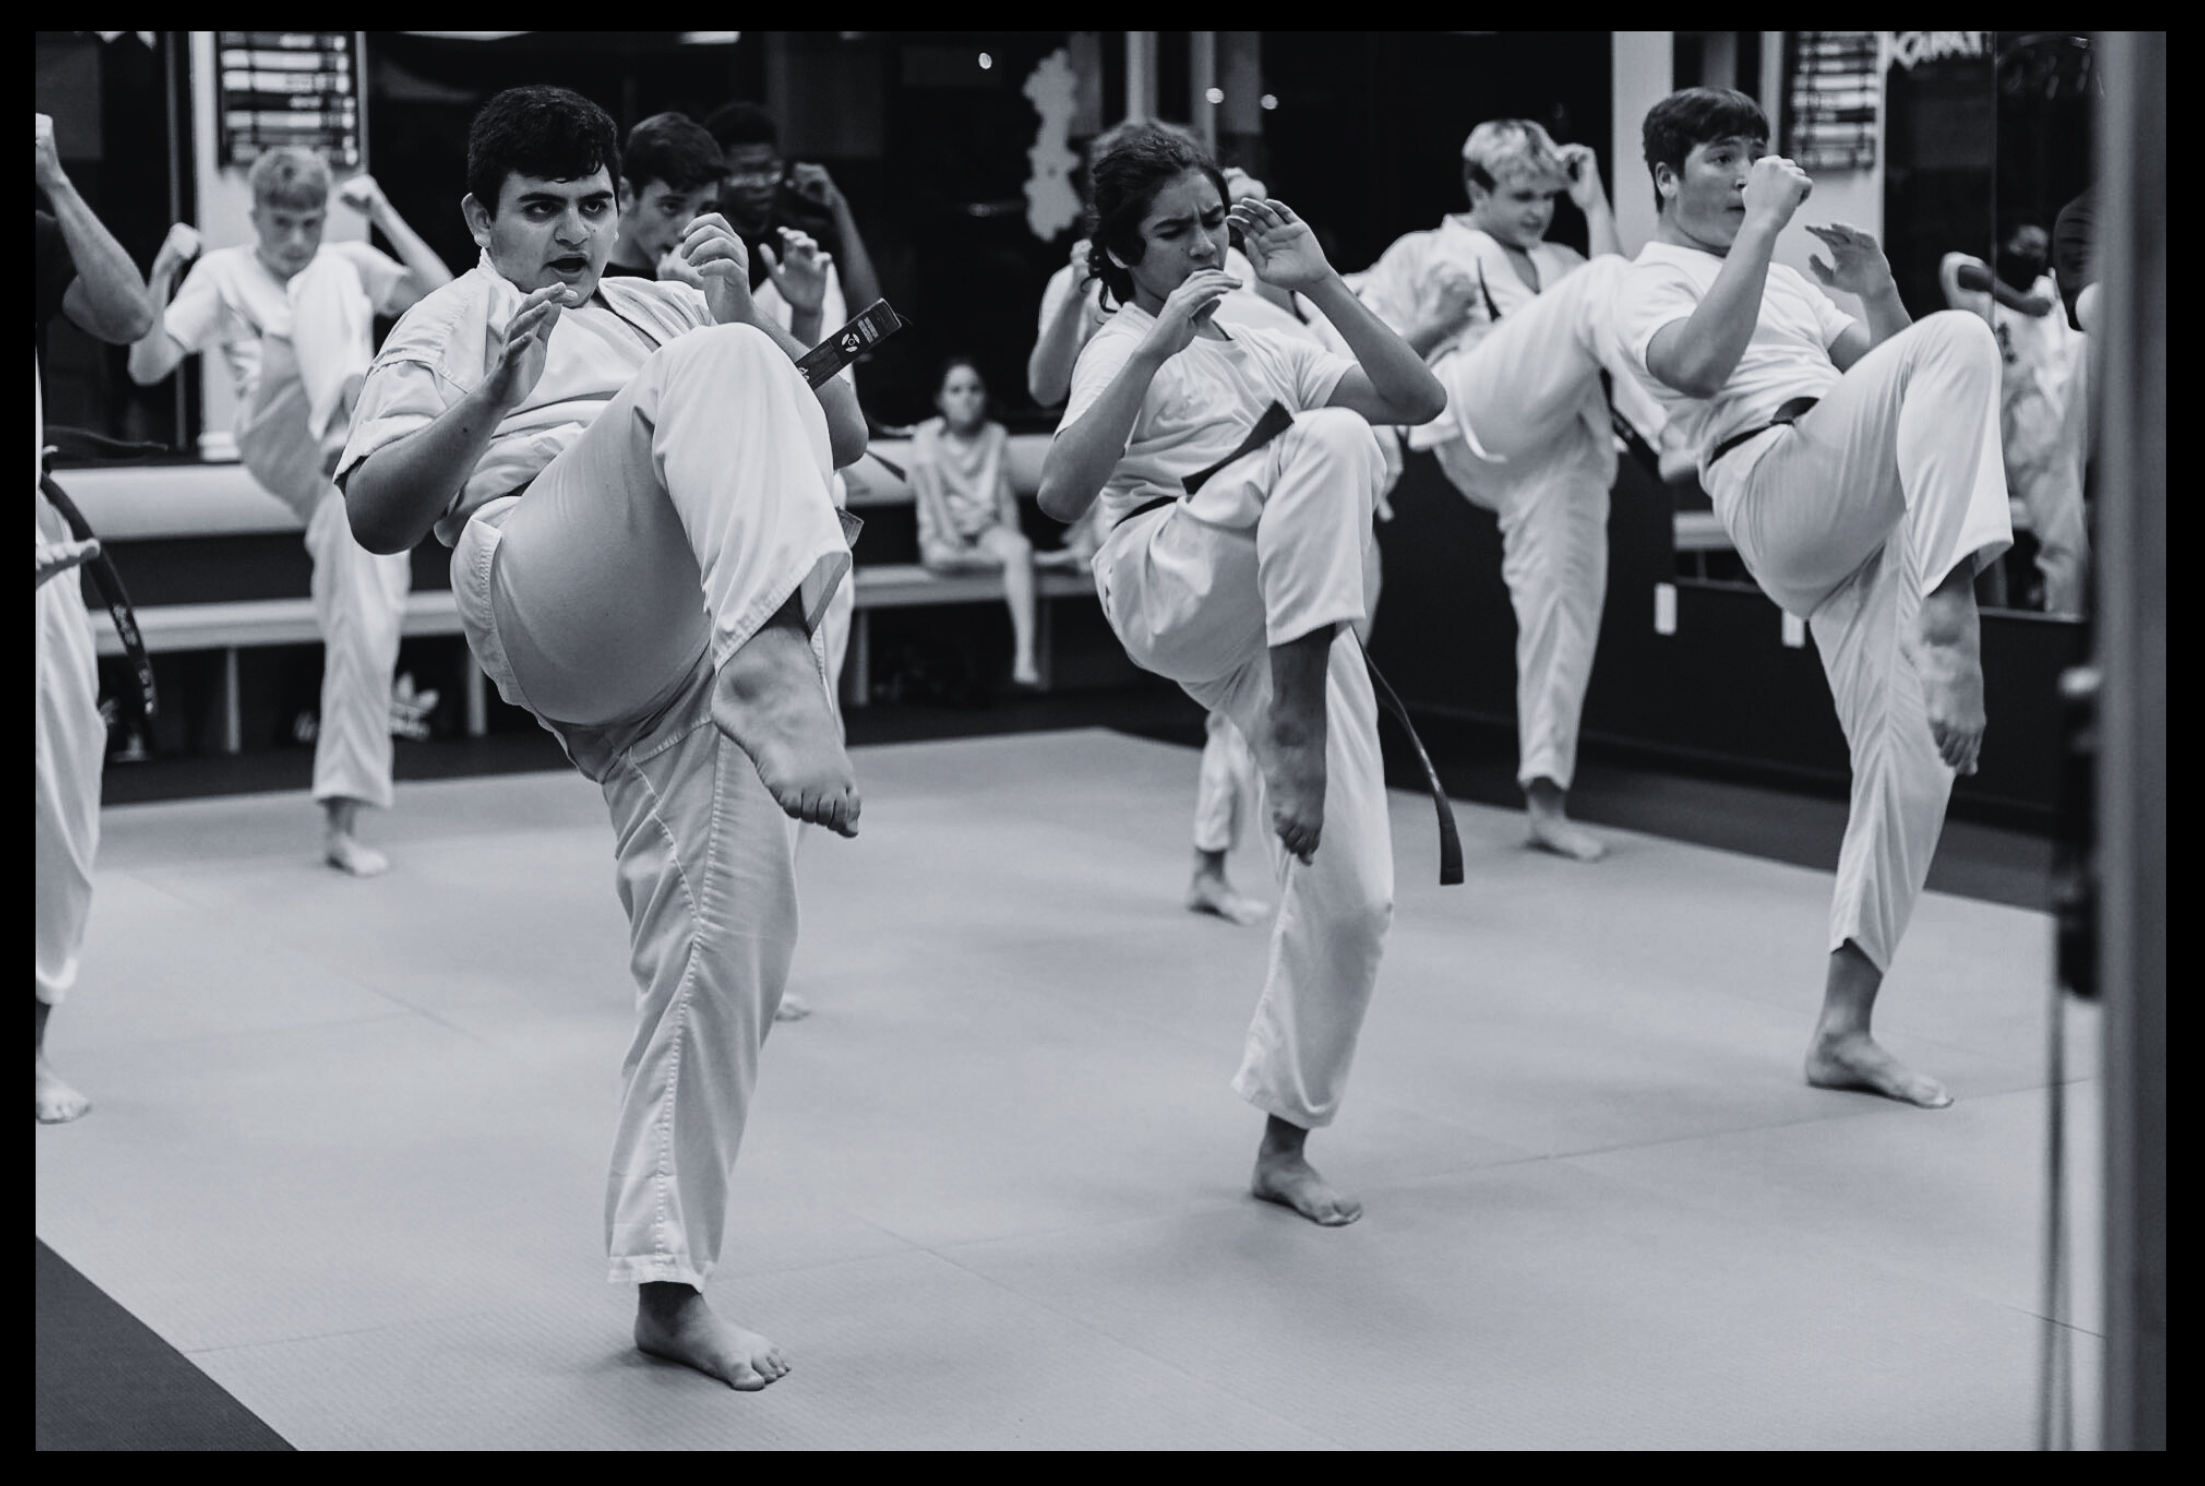 Photo of karate class students wearing gis and preparing to kick